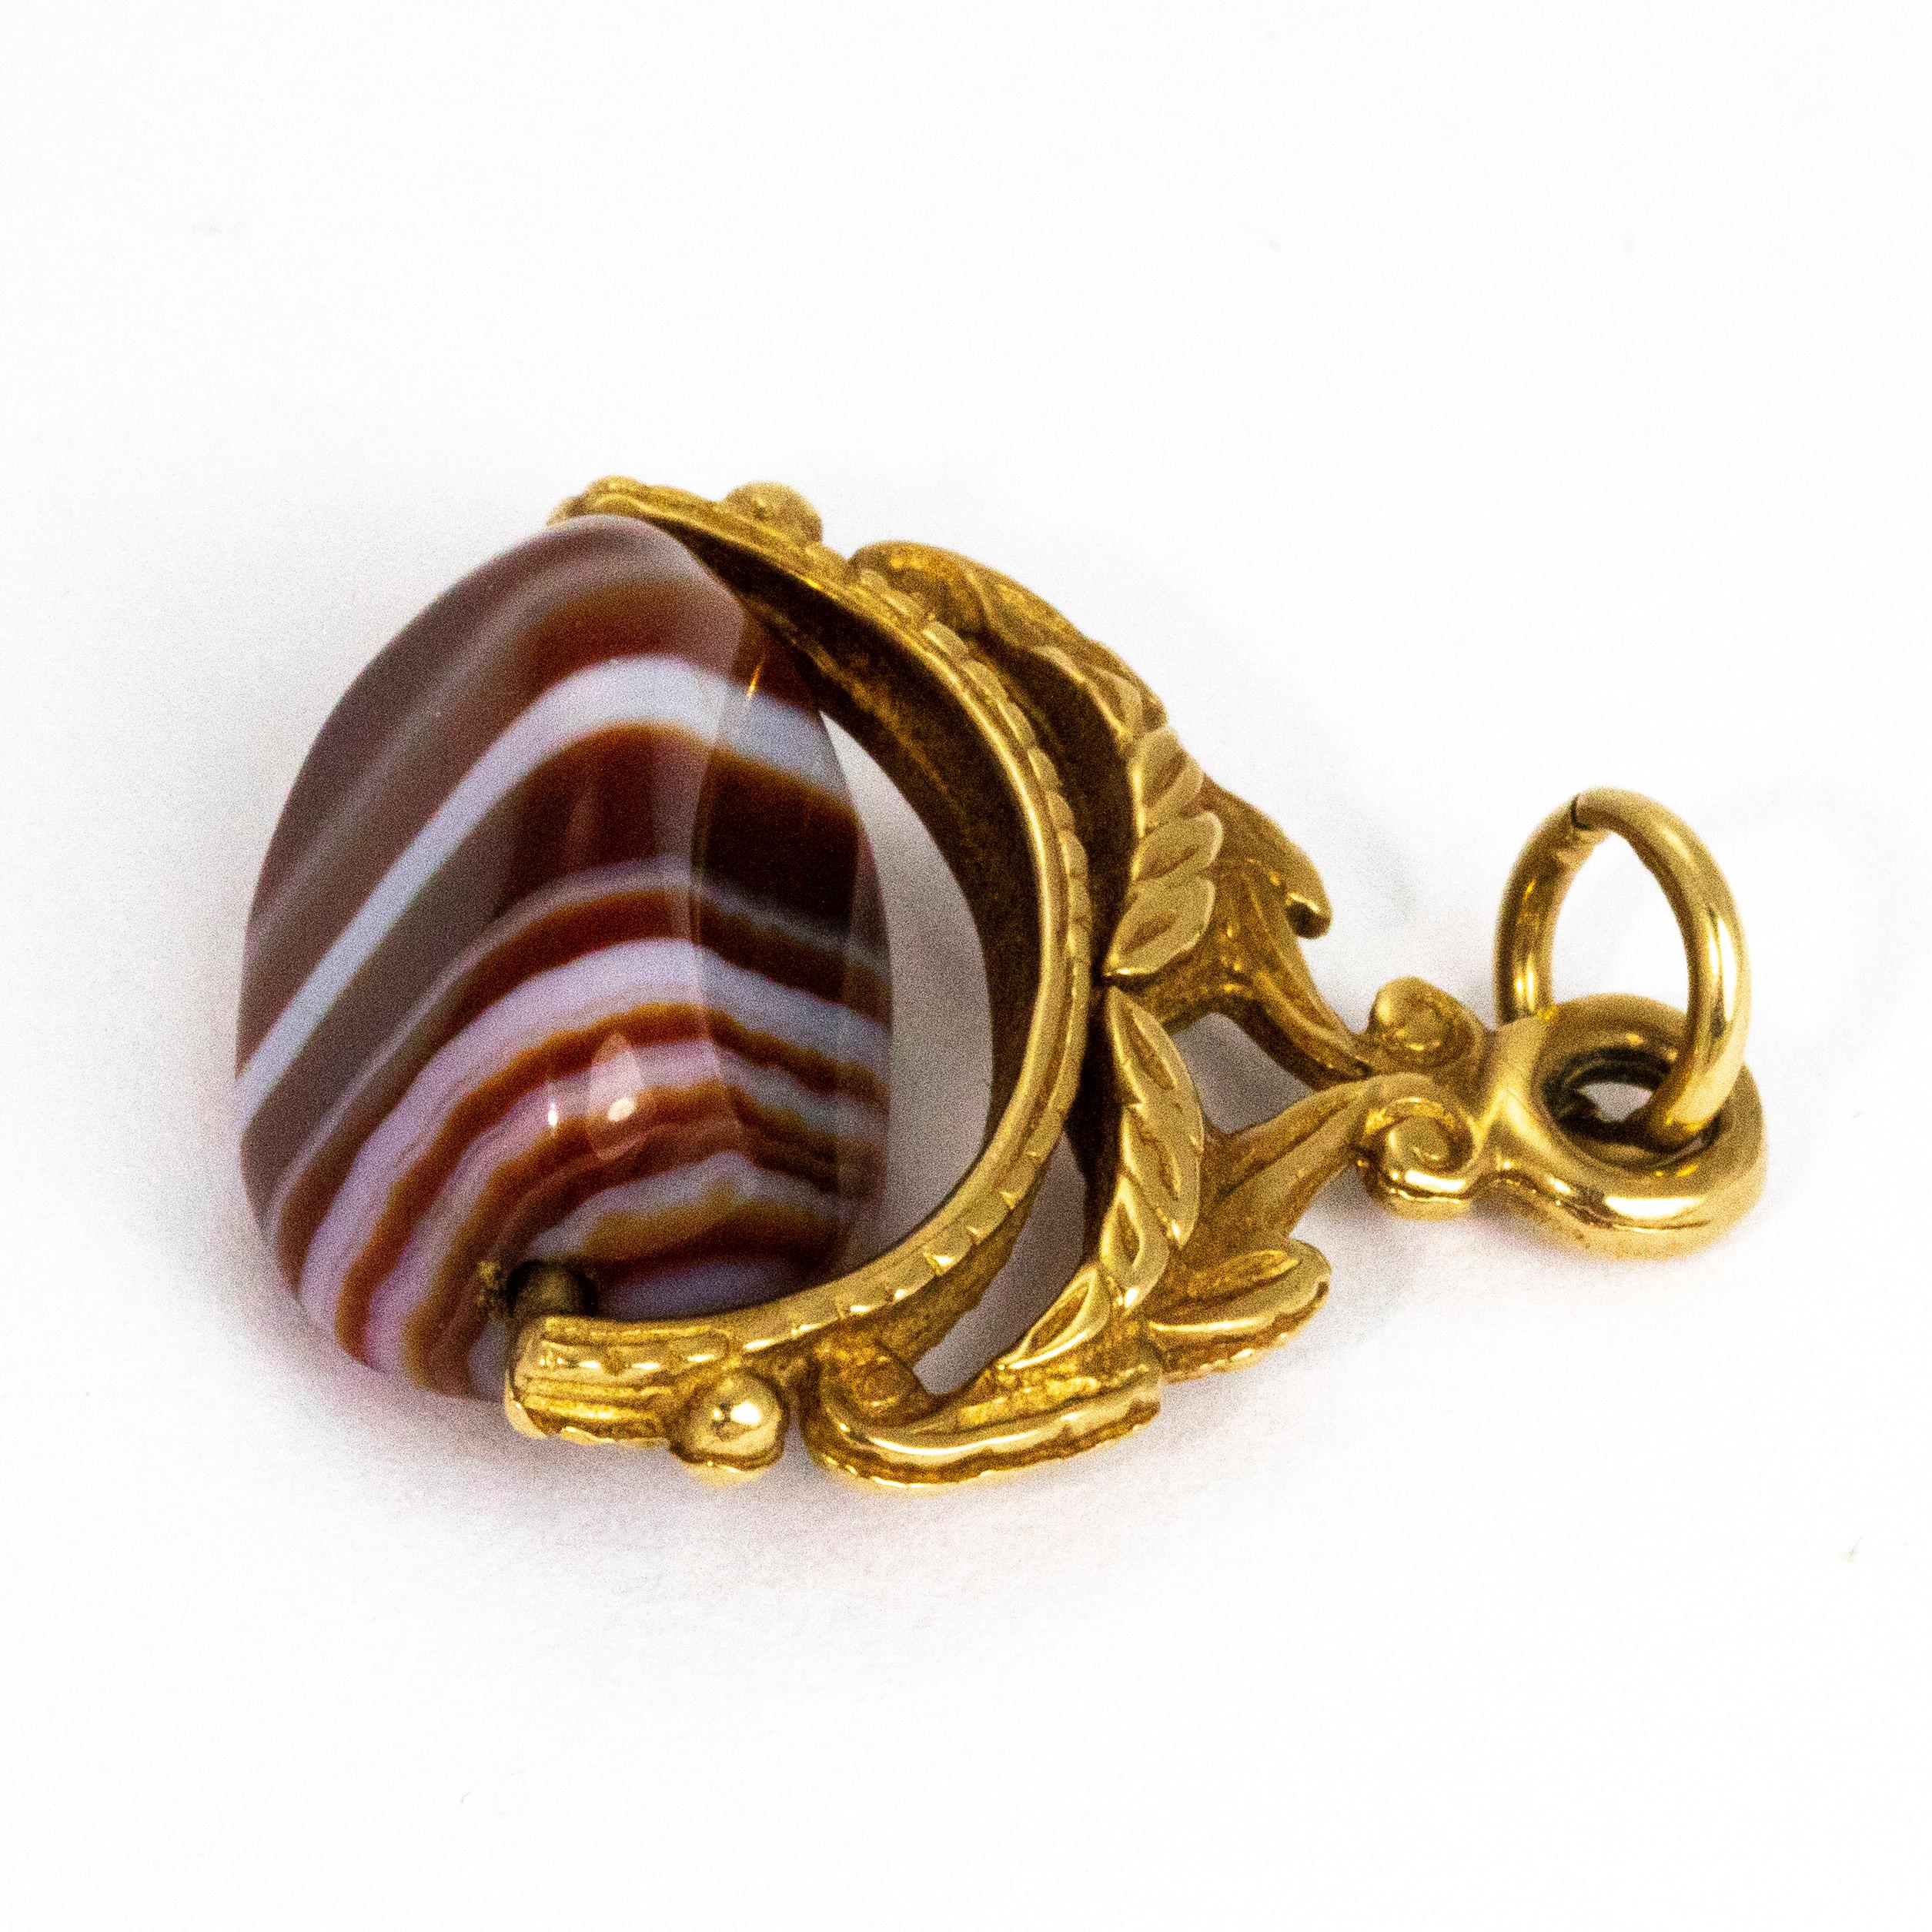 A swivel fob makes the perfect pendant that is sure to draw attention. This particular fob holds a stunning striped agate stone with deep rich reds and browns paired with white. The fob itself is modelled out of 9ct gold and features leaf and scroll